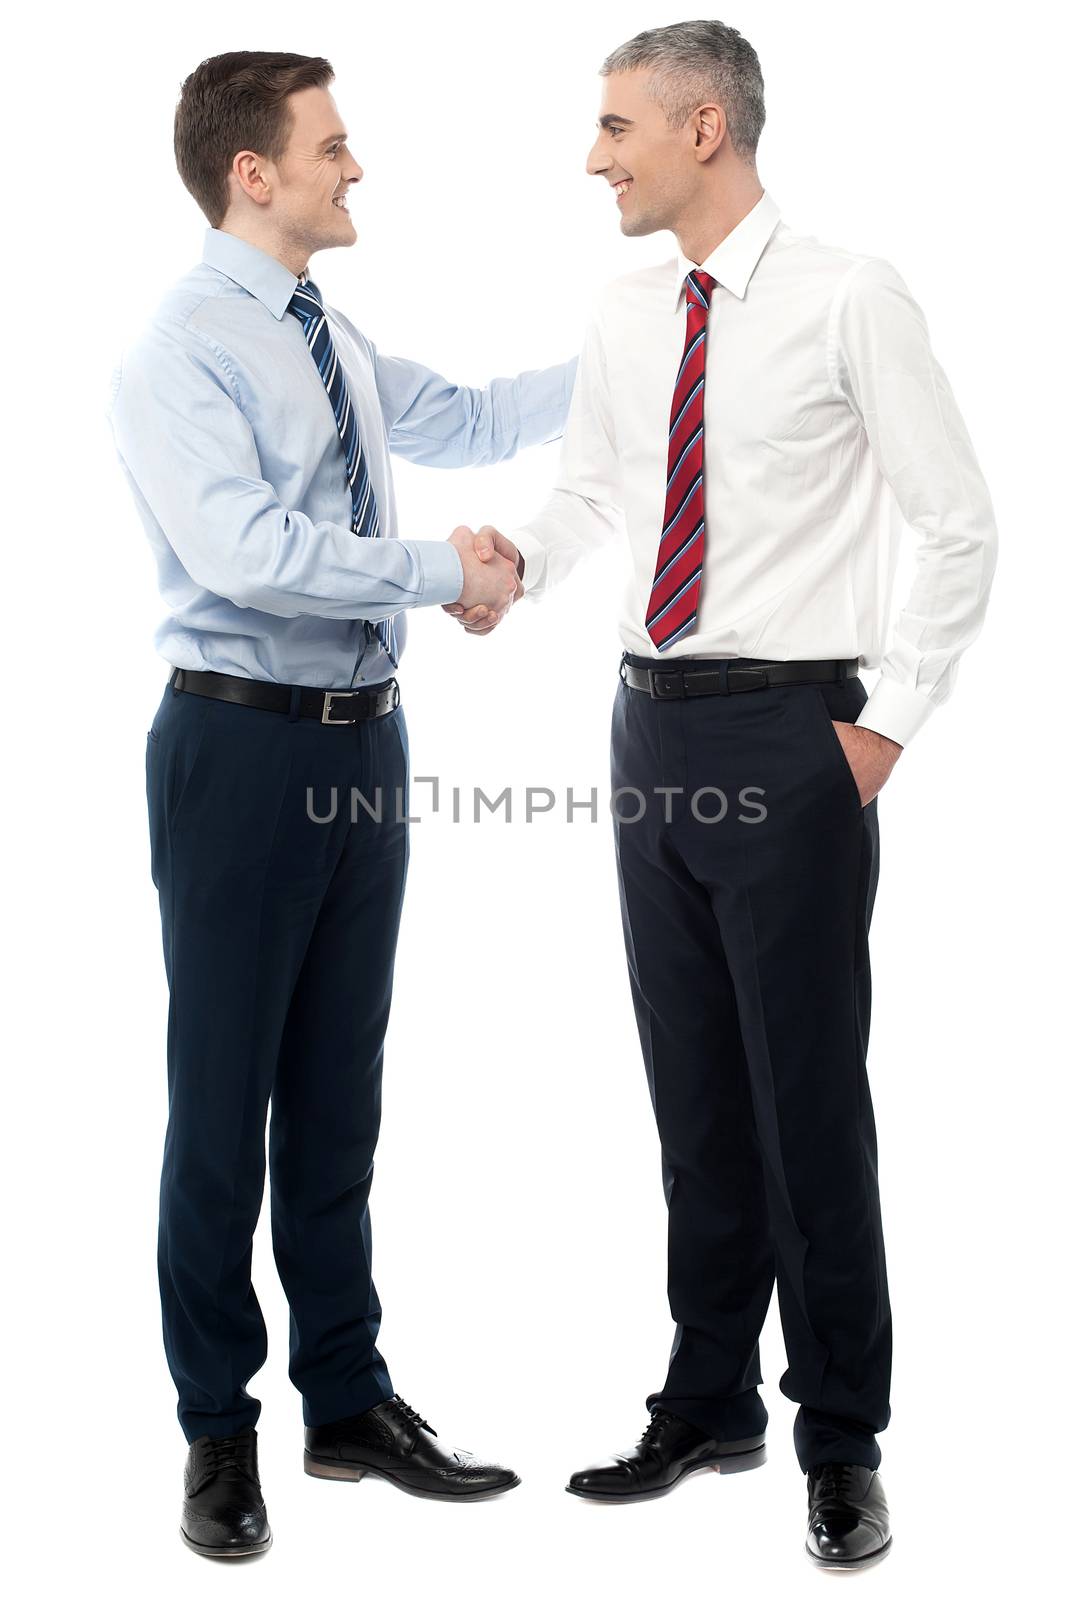 The deal has been finalized. by stockyimages